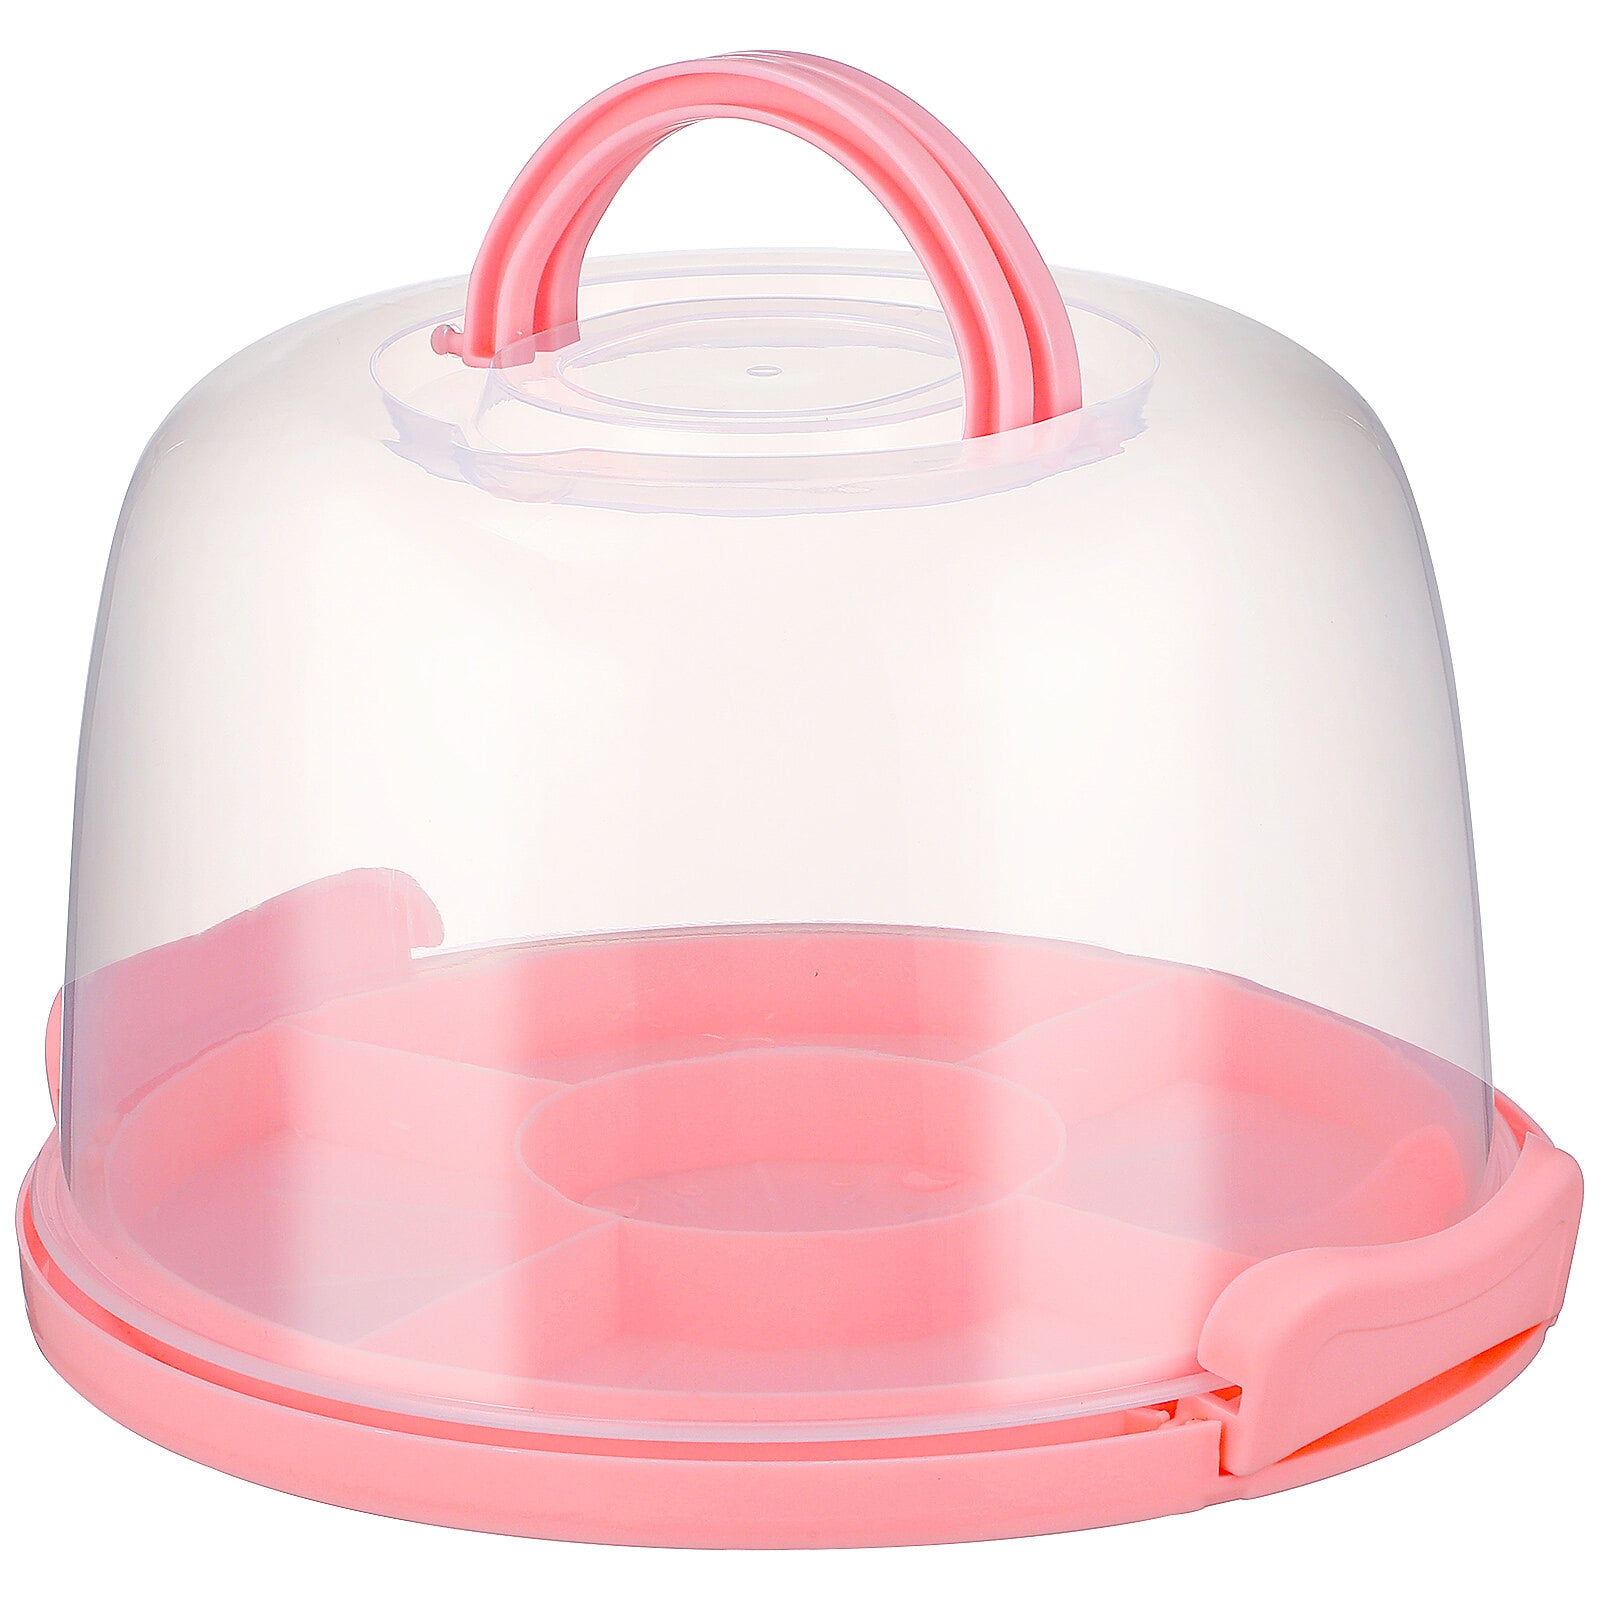 Bakers Sto N Go Cookie Carrier *Compact Size*